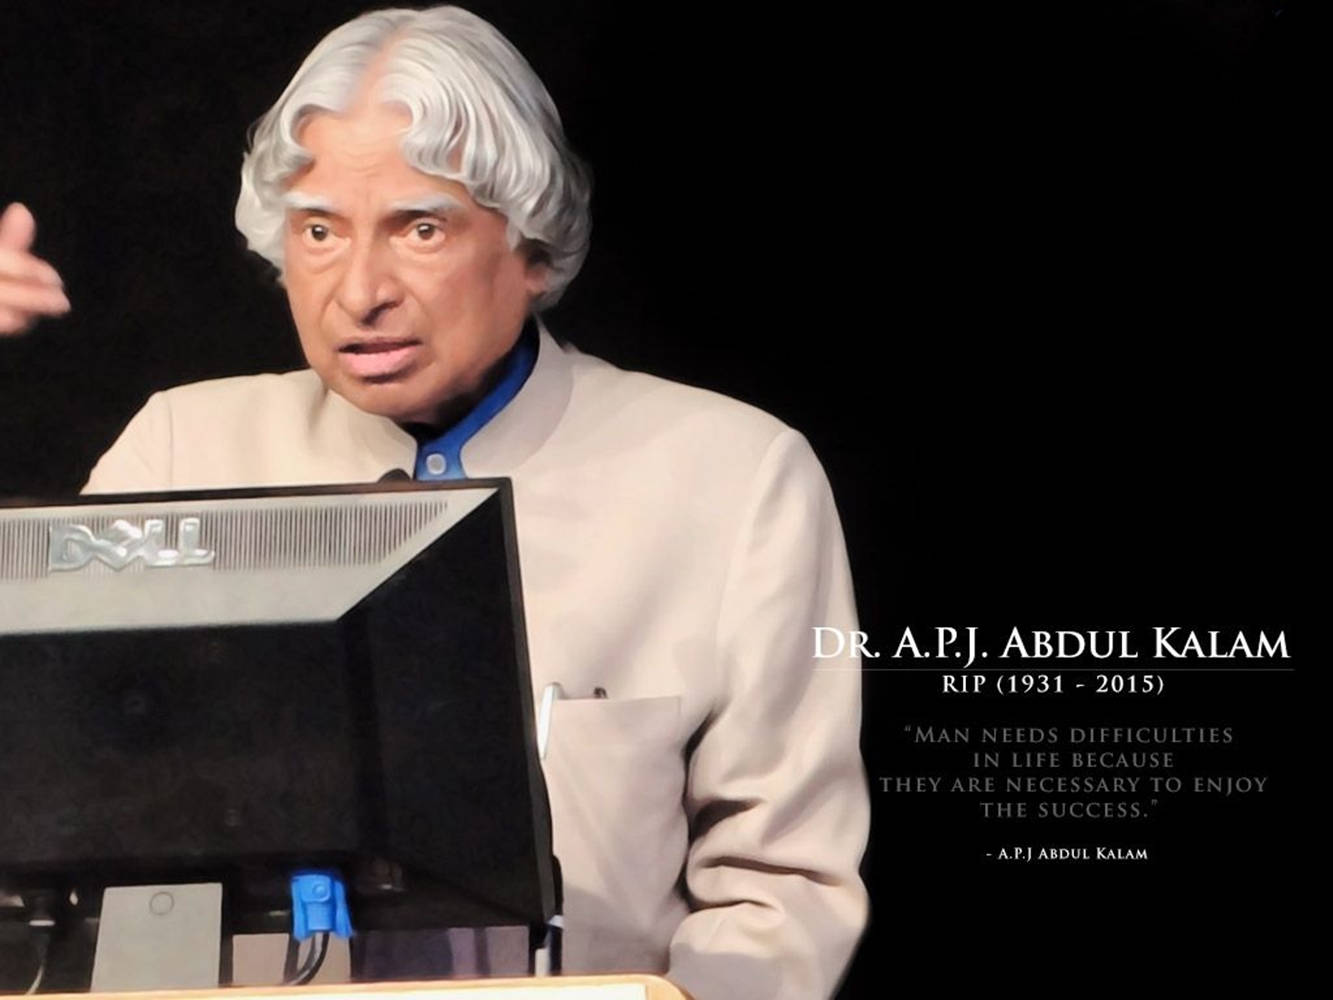 Abdul Kalam Hd Difficulties And Success Quote Background